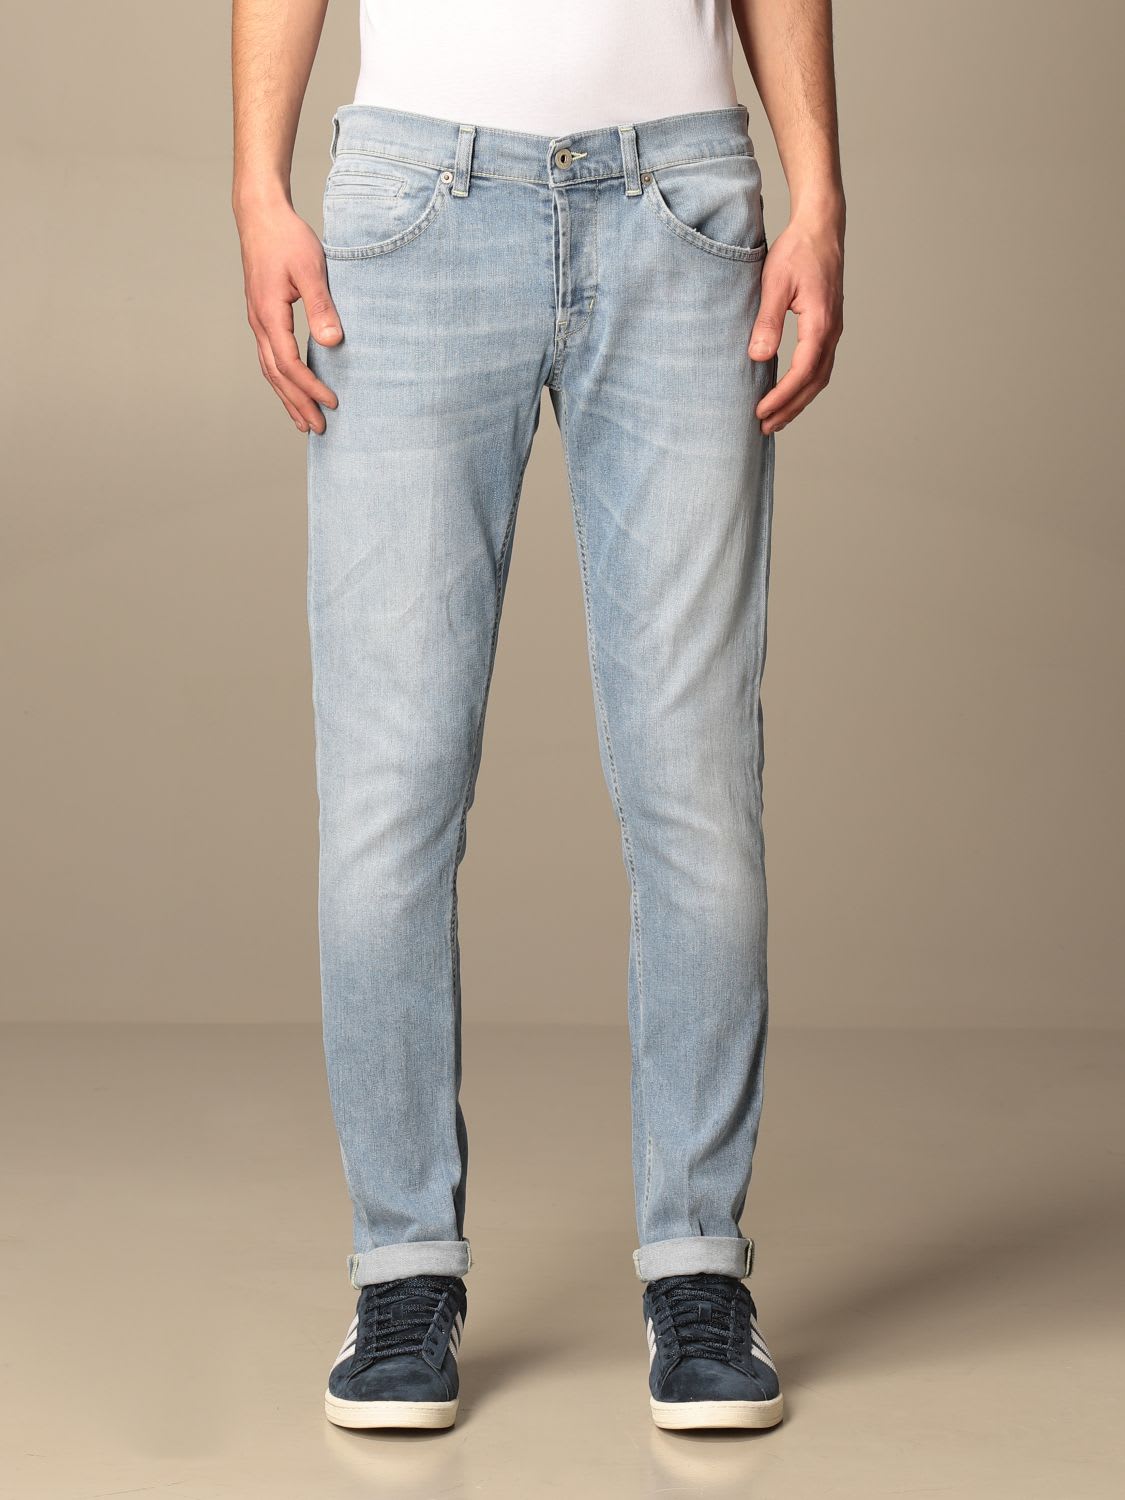 Dondup Jeans George Dondup Skinny Stretch Jeans With 17 Bottom